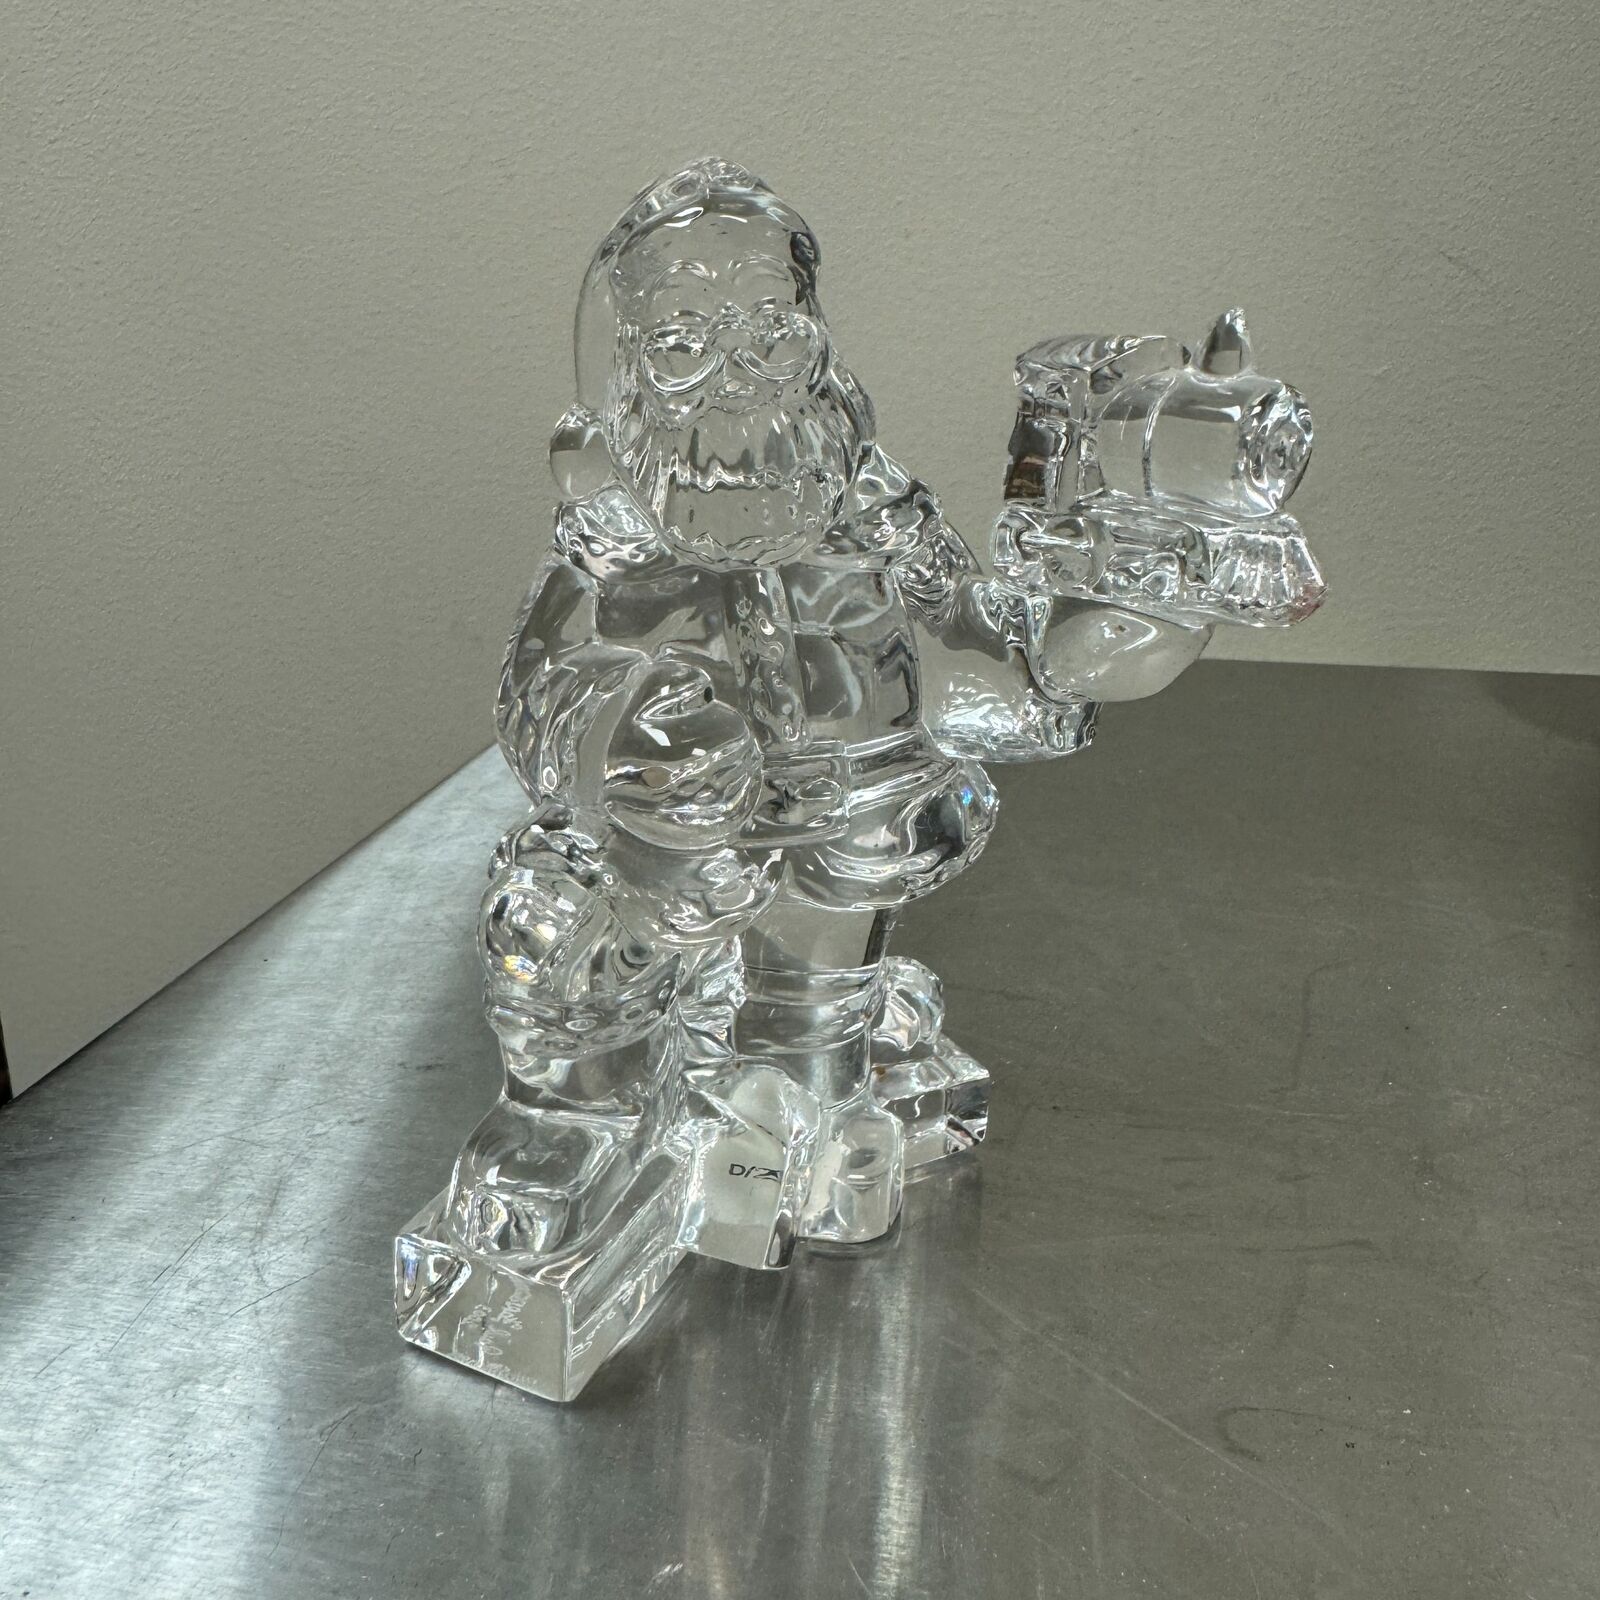 WATERFORD Crystal SANTA WITH TRAIN Sculpture / Figurine #108146  